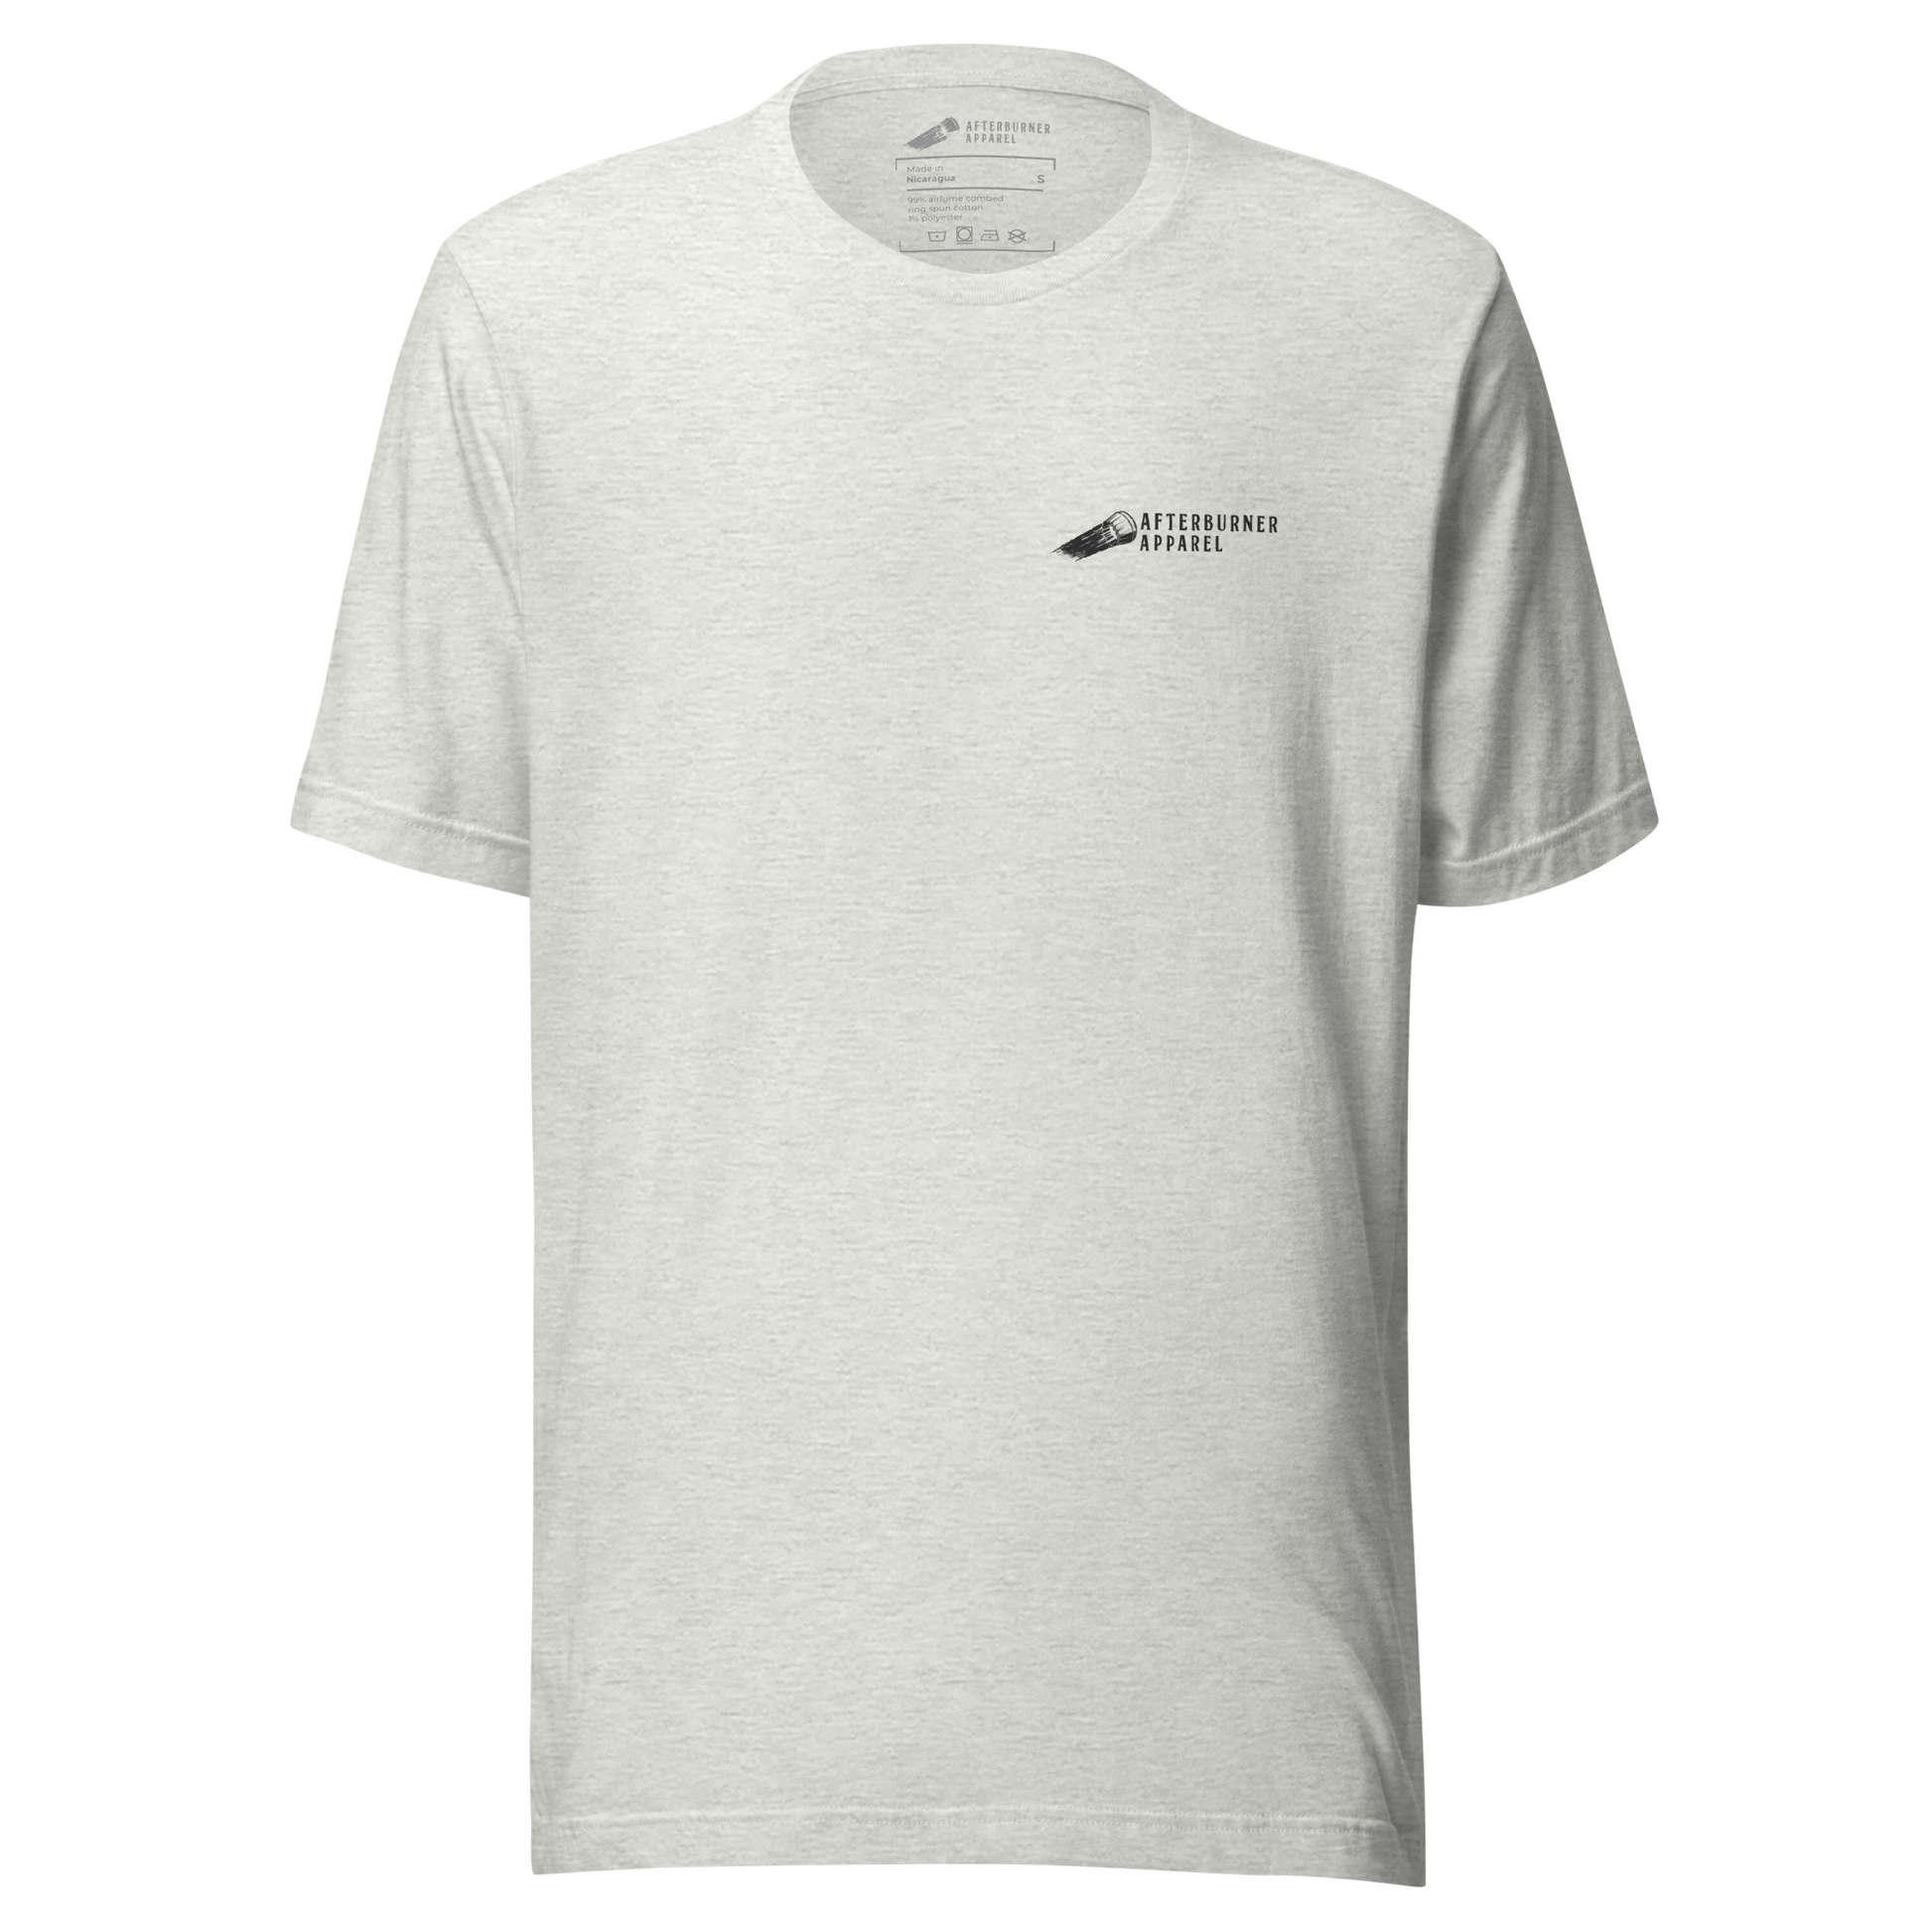 The Classic Tee - Afterburner Apparel